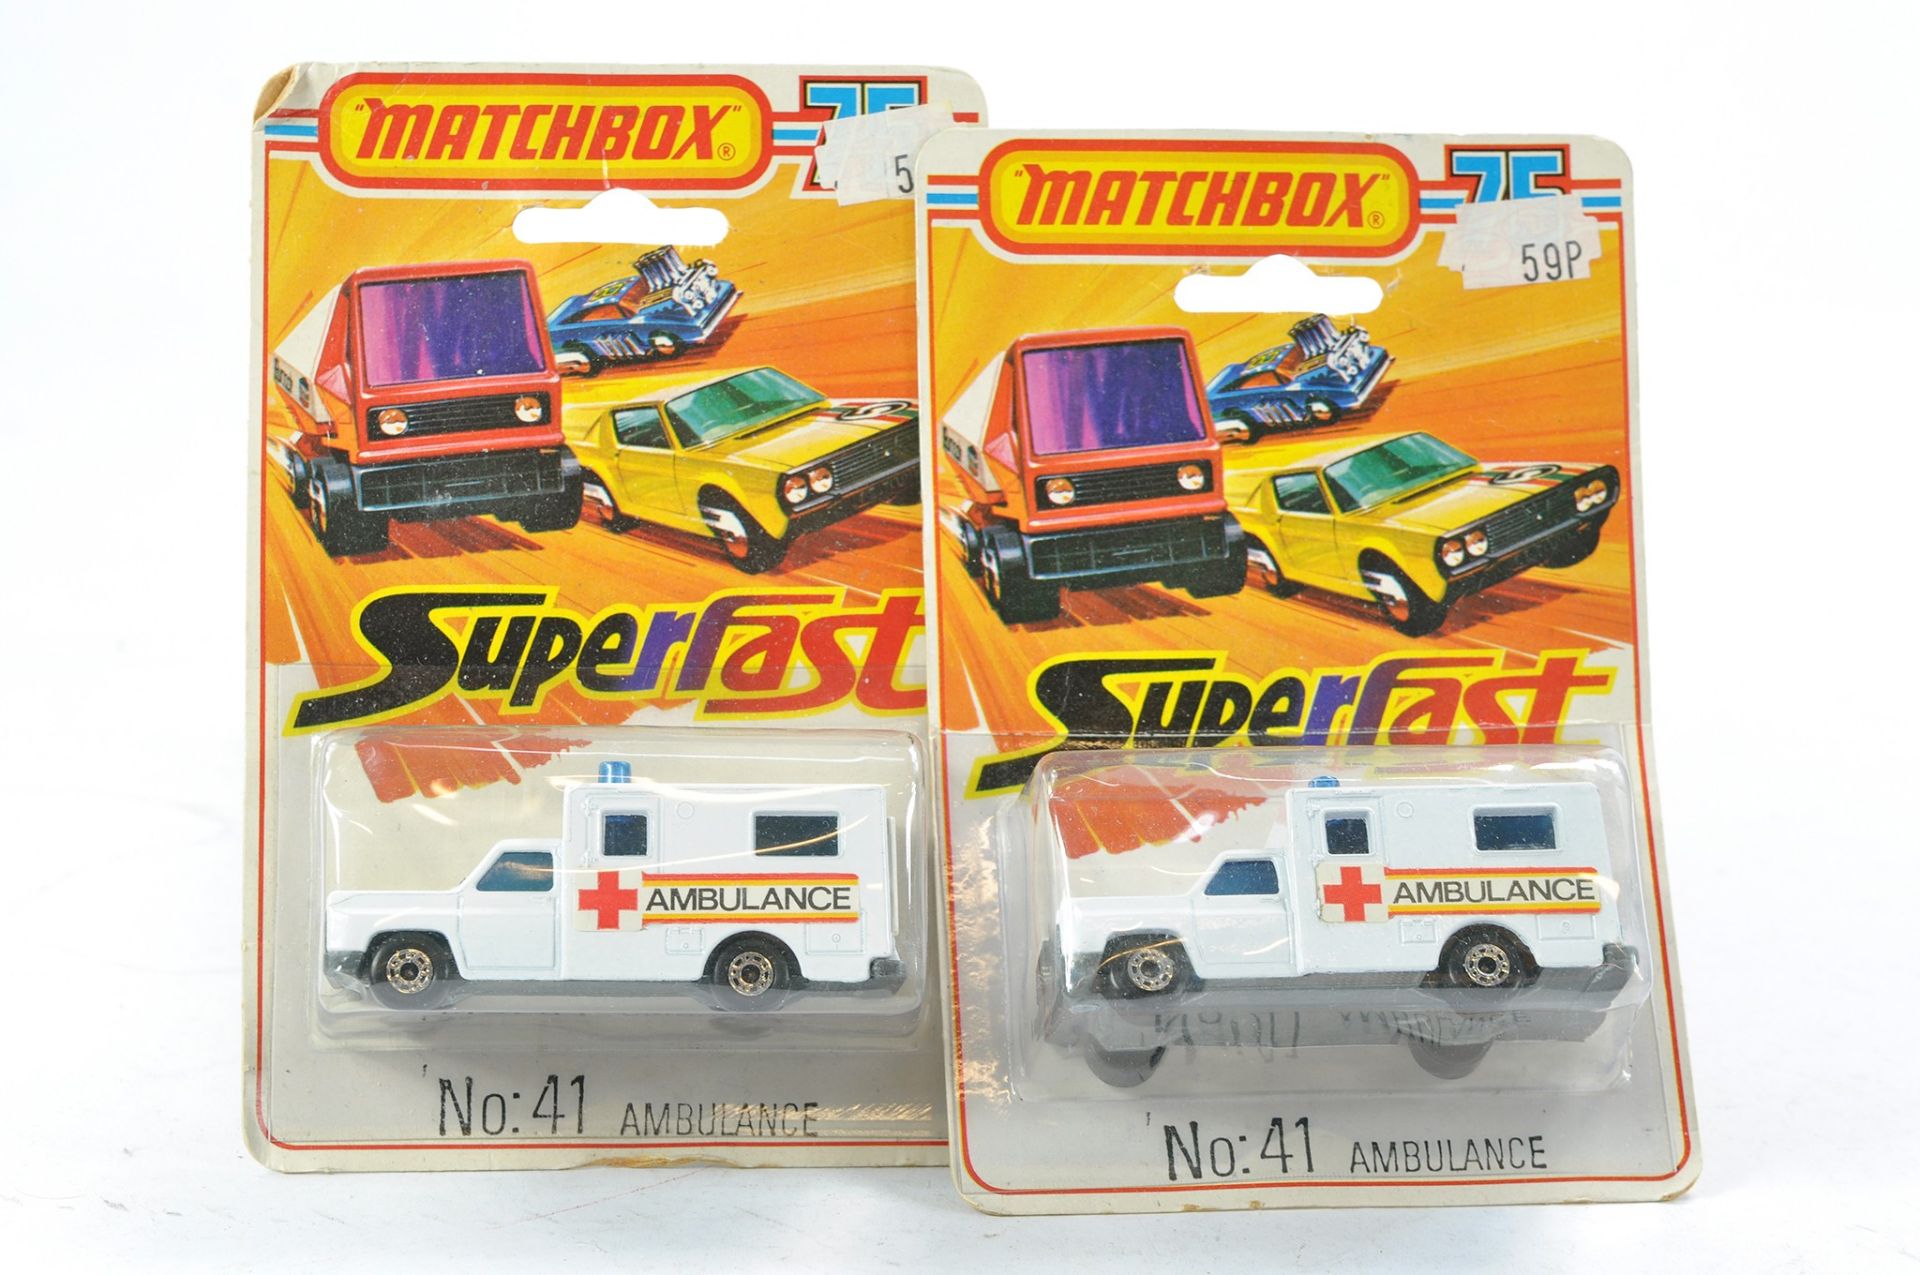 Matchbox Superfast duo of 41c Ambulance. Excellent on unopened blisters. Cards creased.